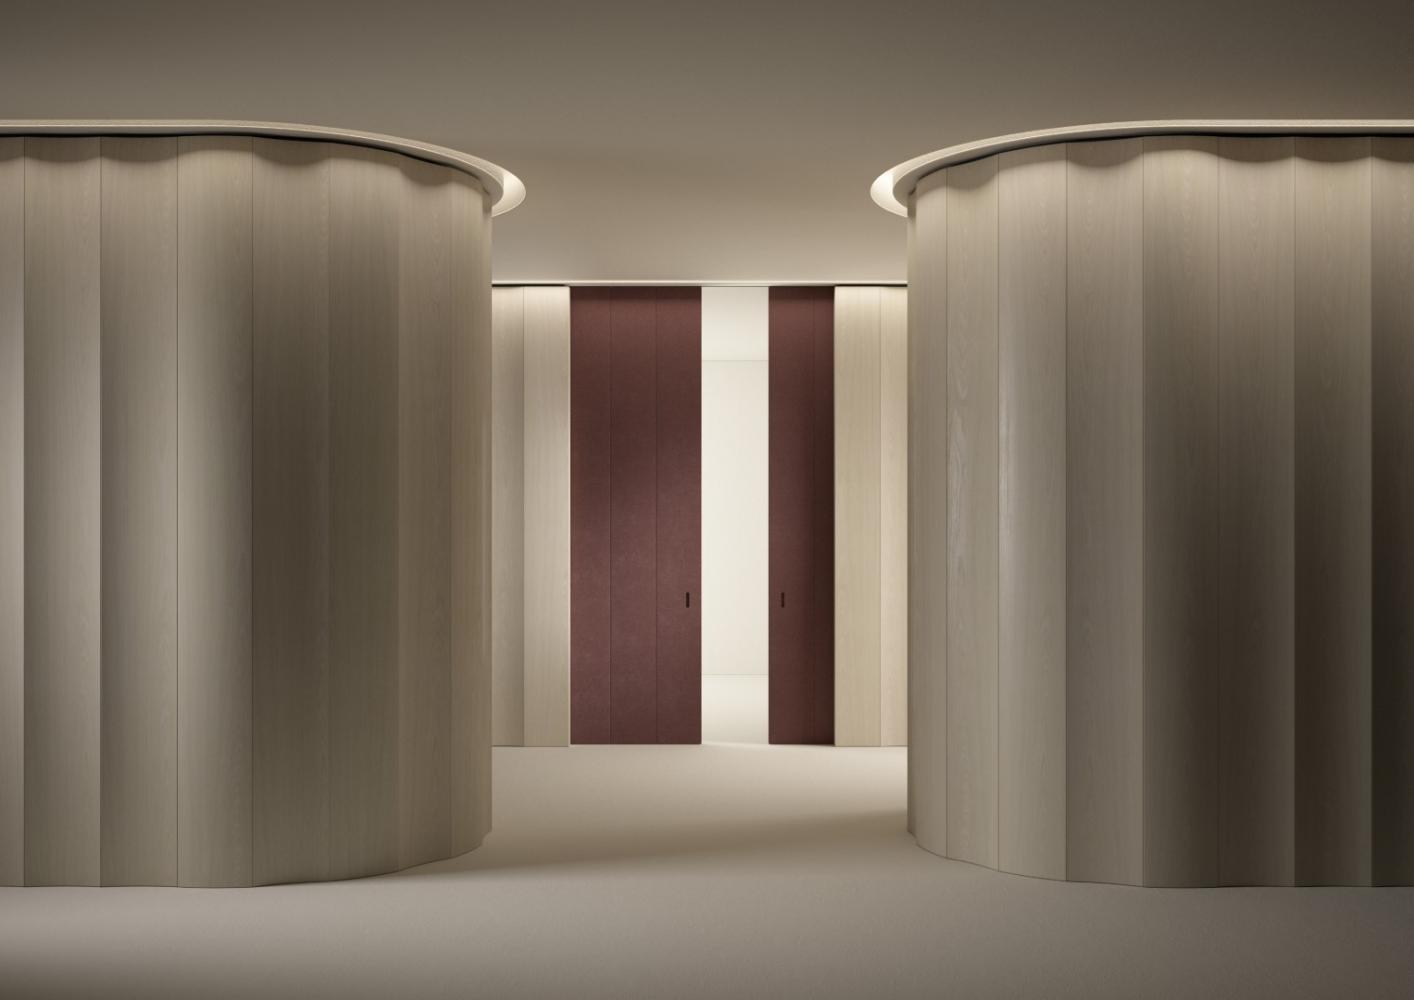 laurameroni made to measure design wall panels in wood